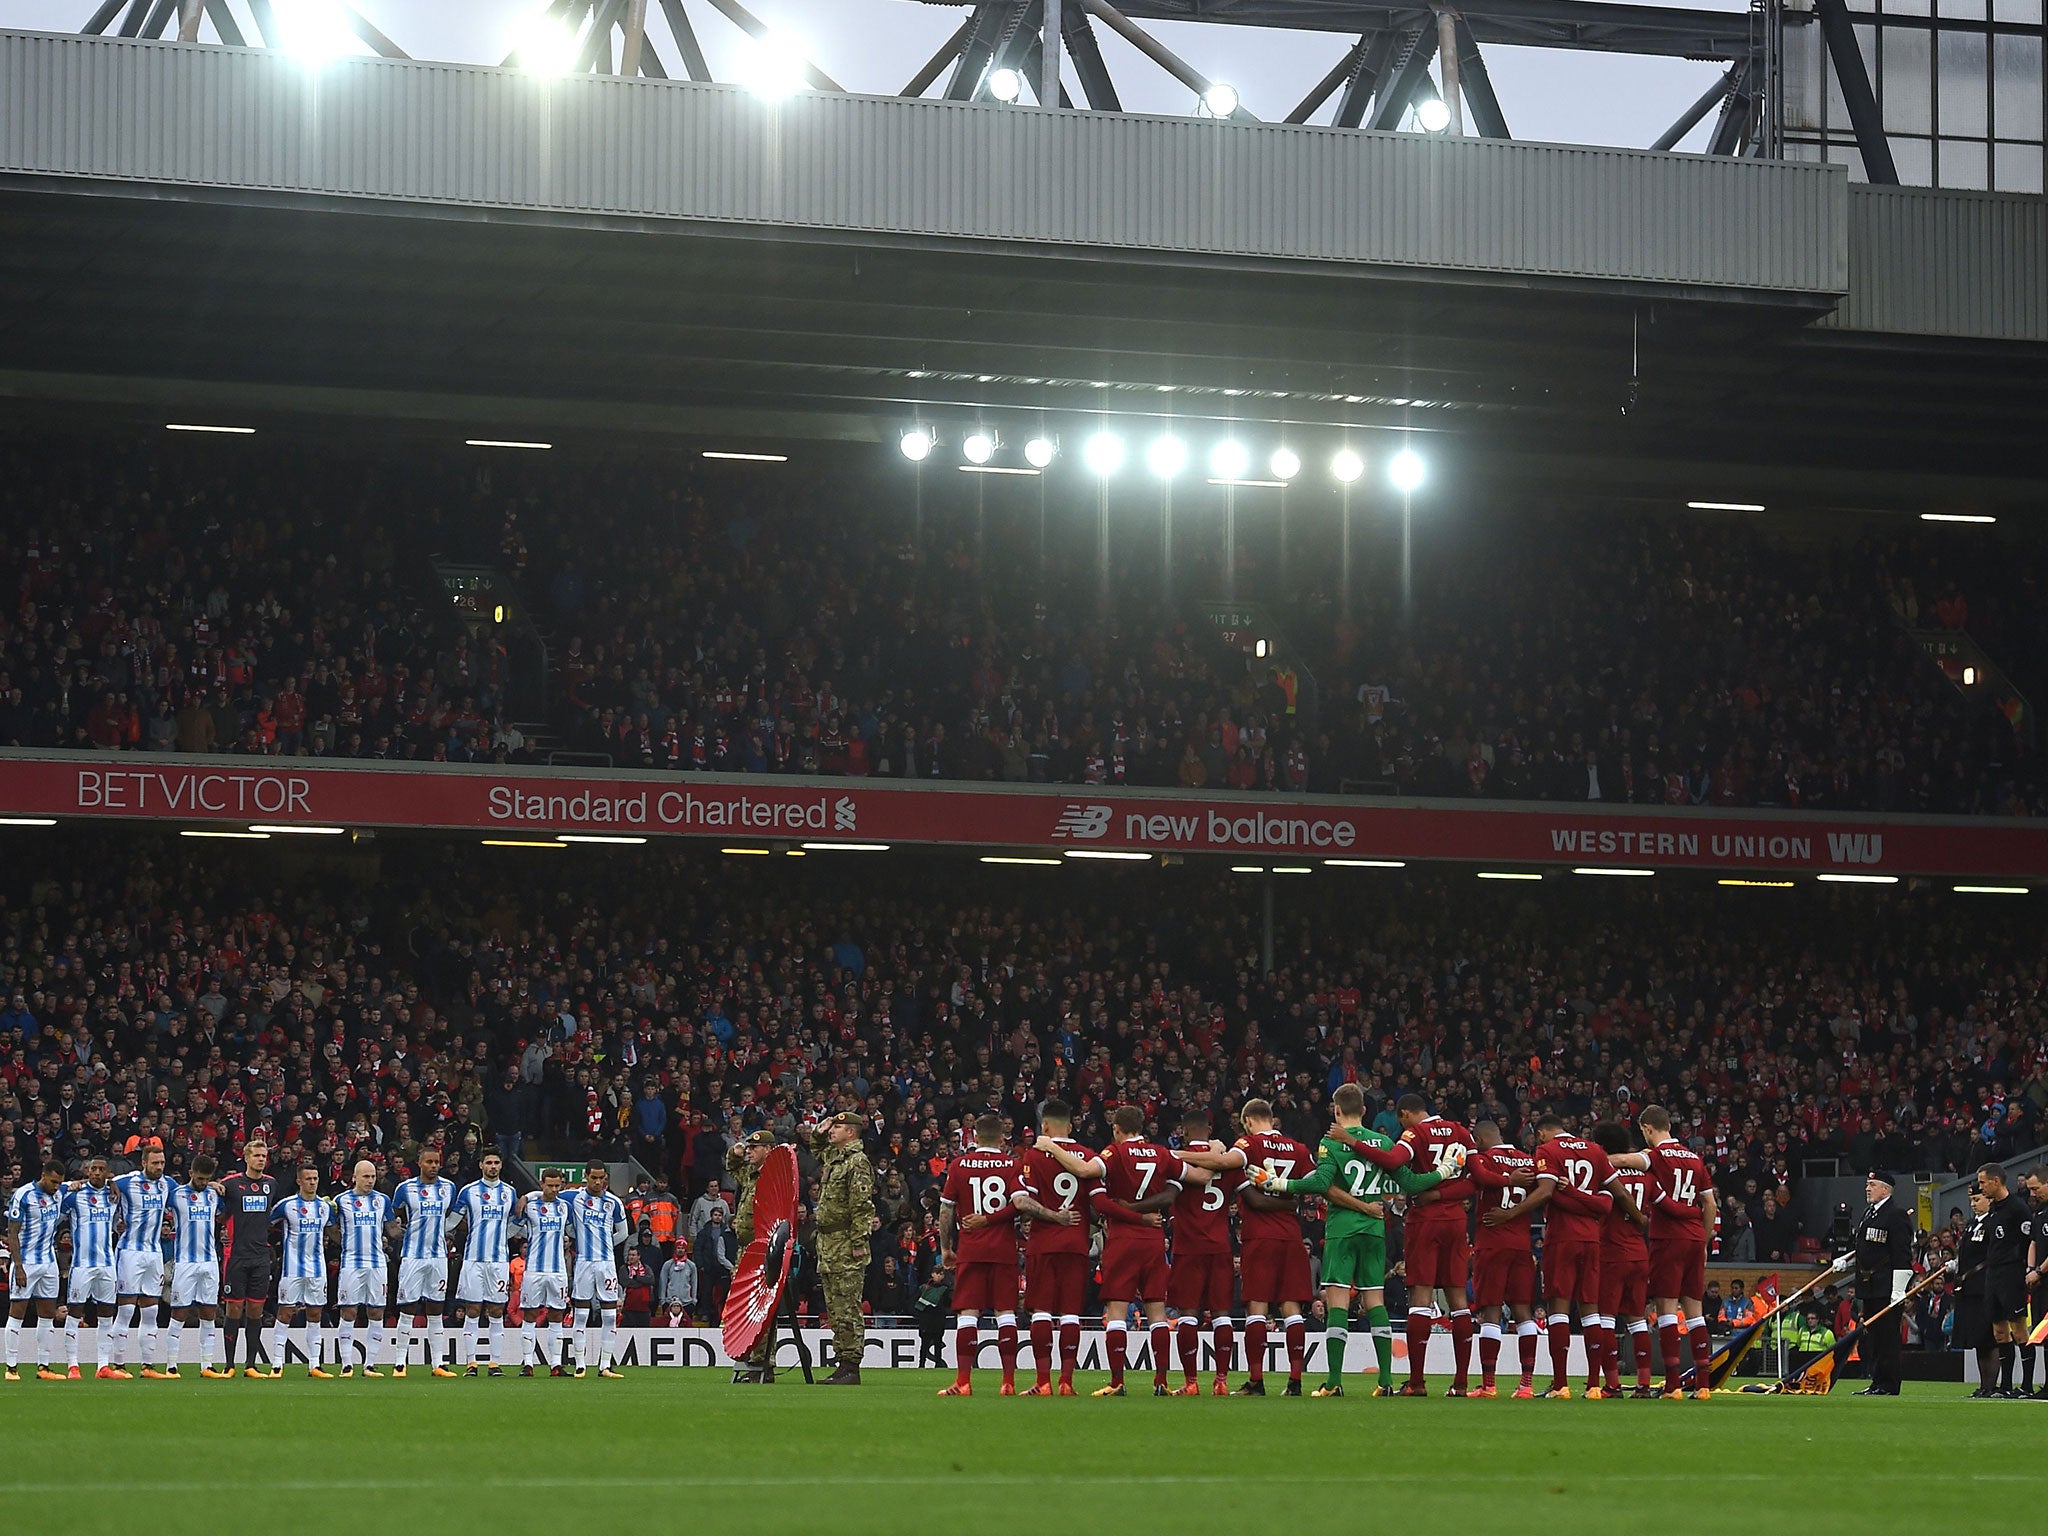 Anfield observes a minute's silence before kick-off